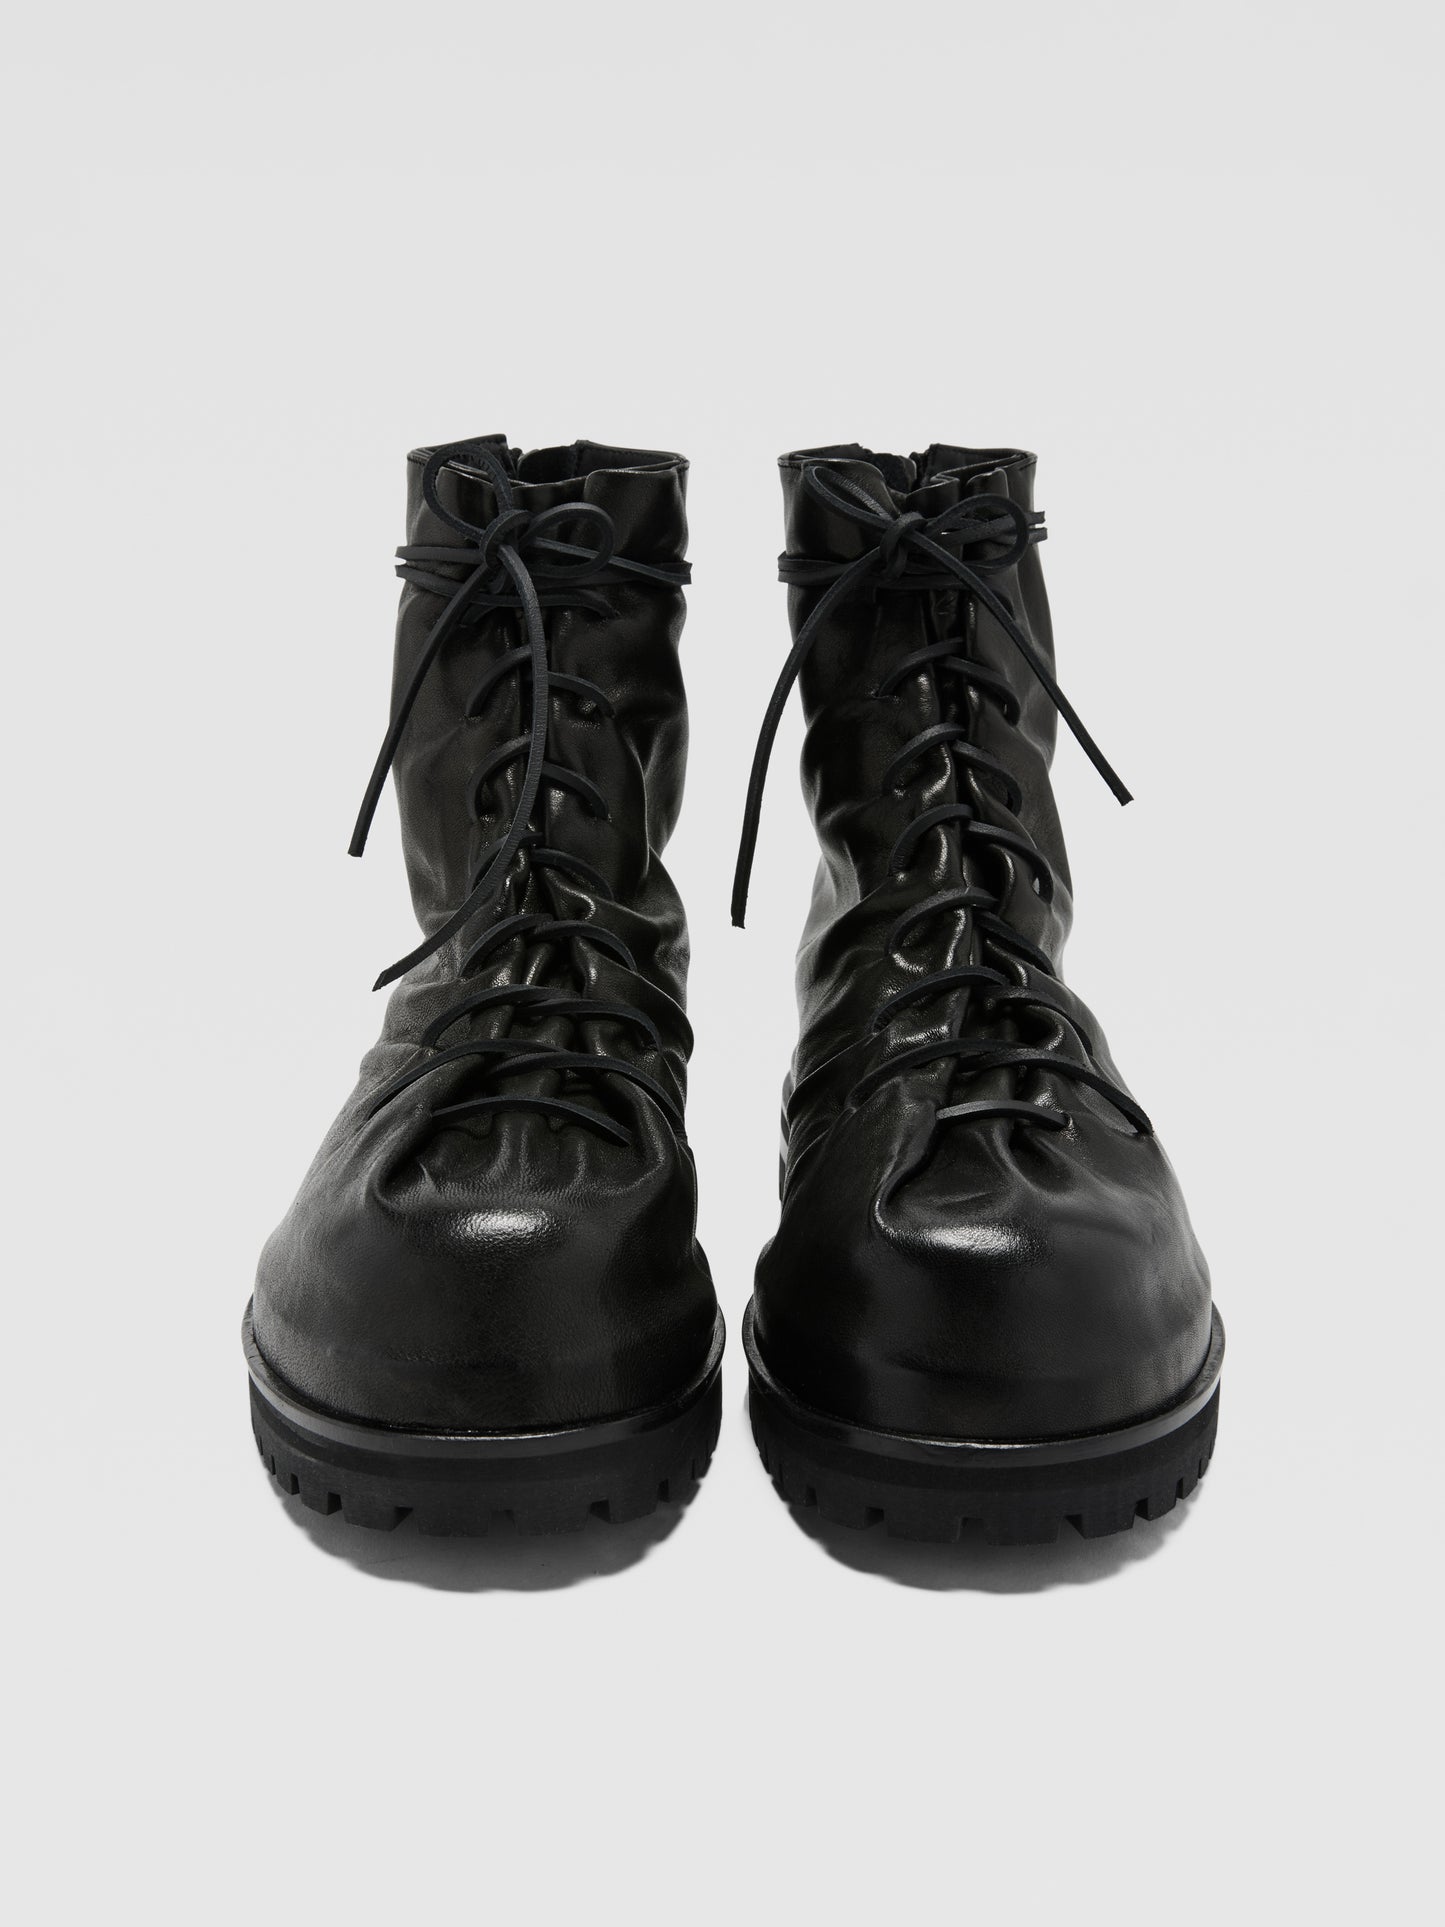 BLACK LEATHER LACE-UP BOOTS